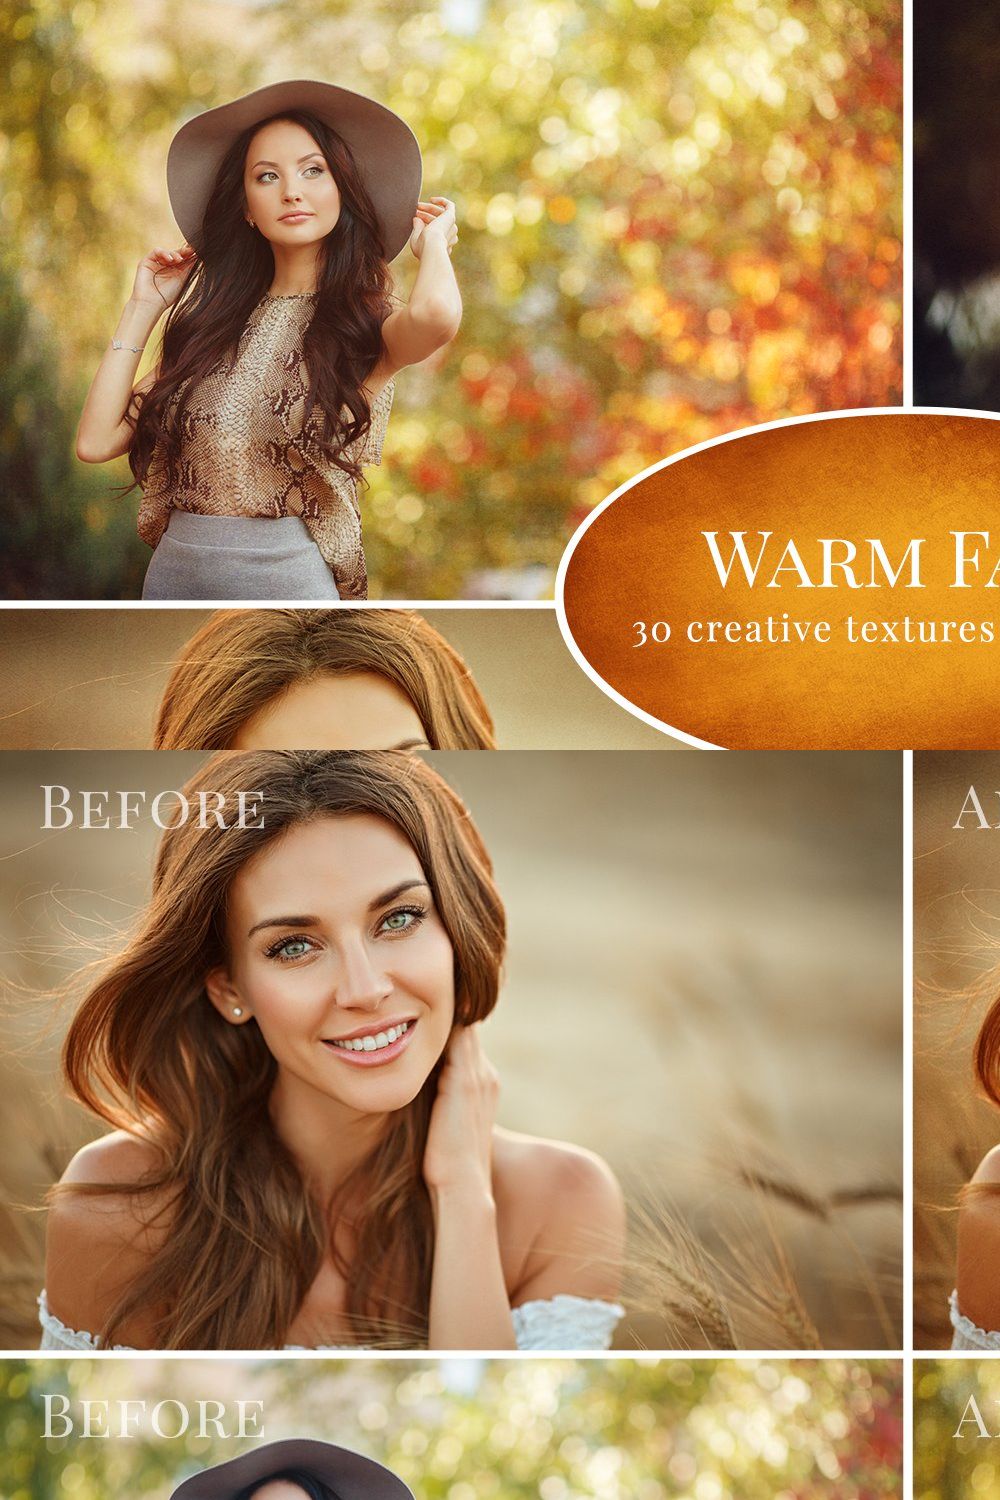 Warm Fall Textures collection pinterest preview image.